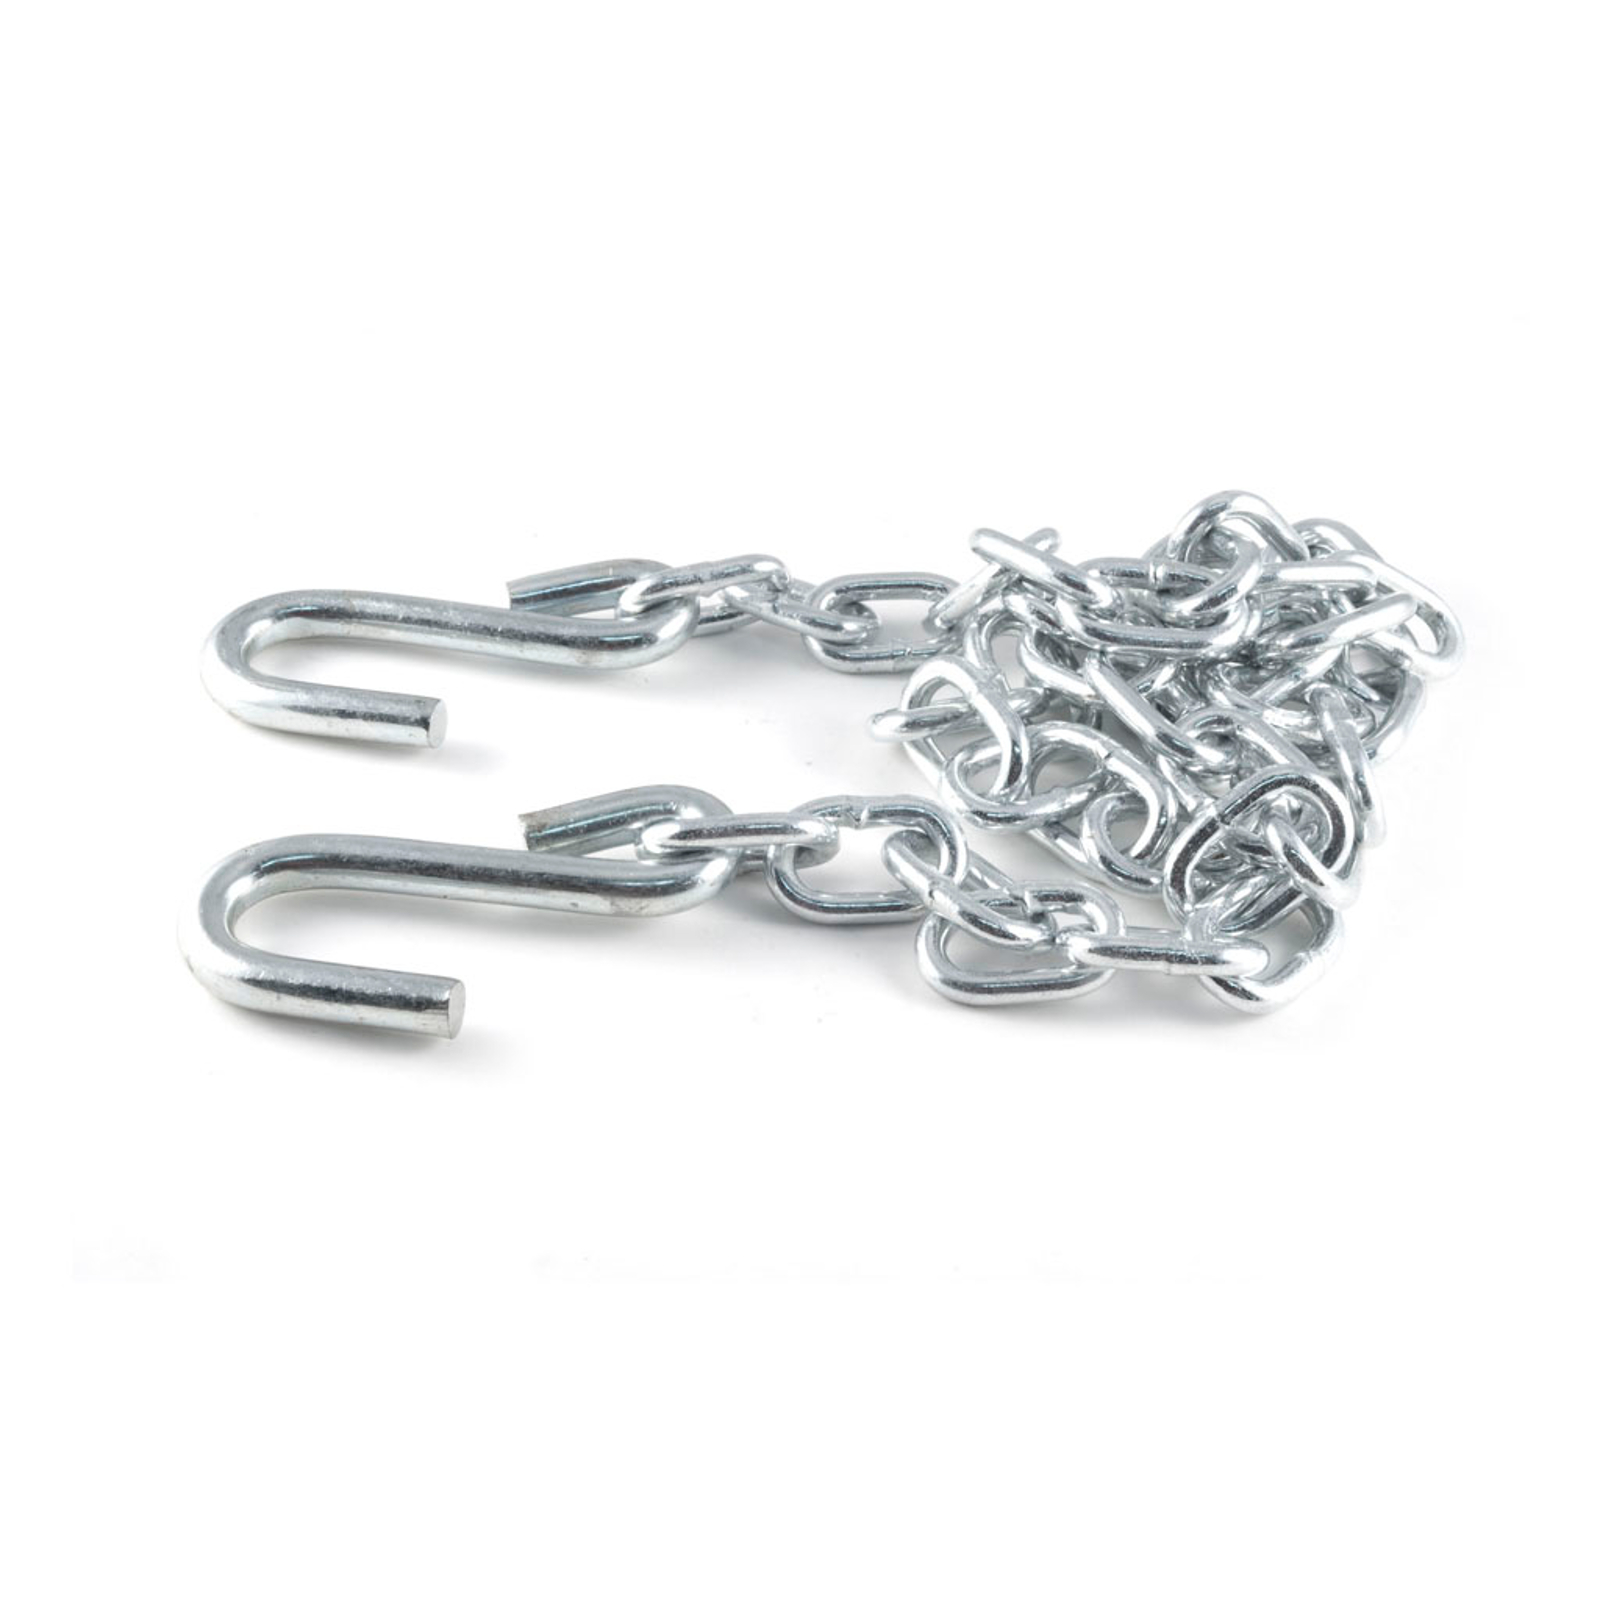 Safety Chain With S-Hooks